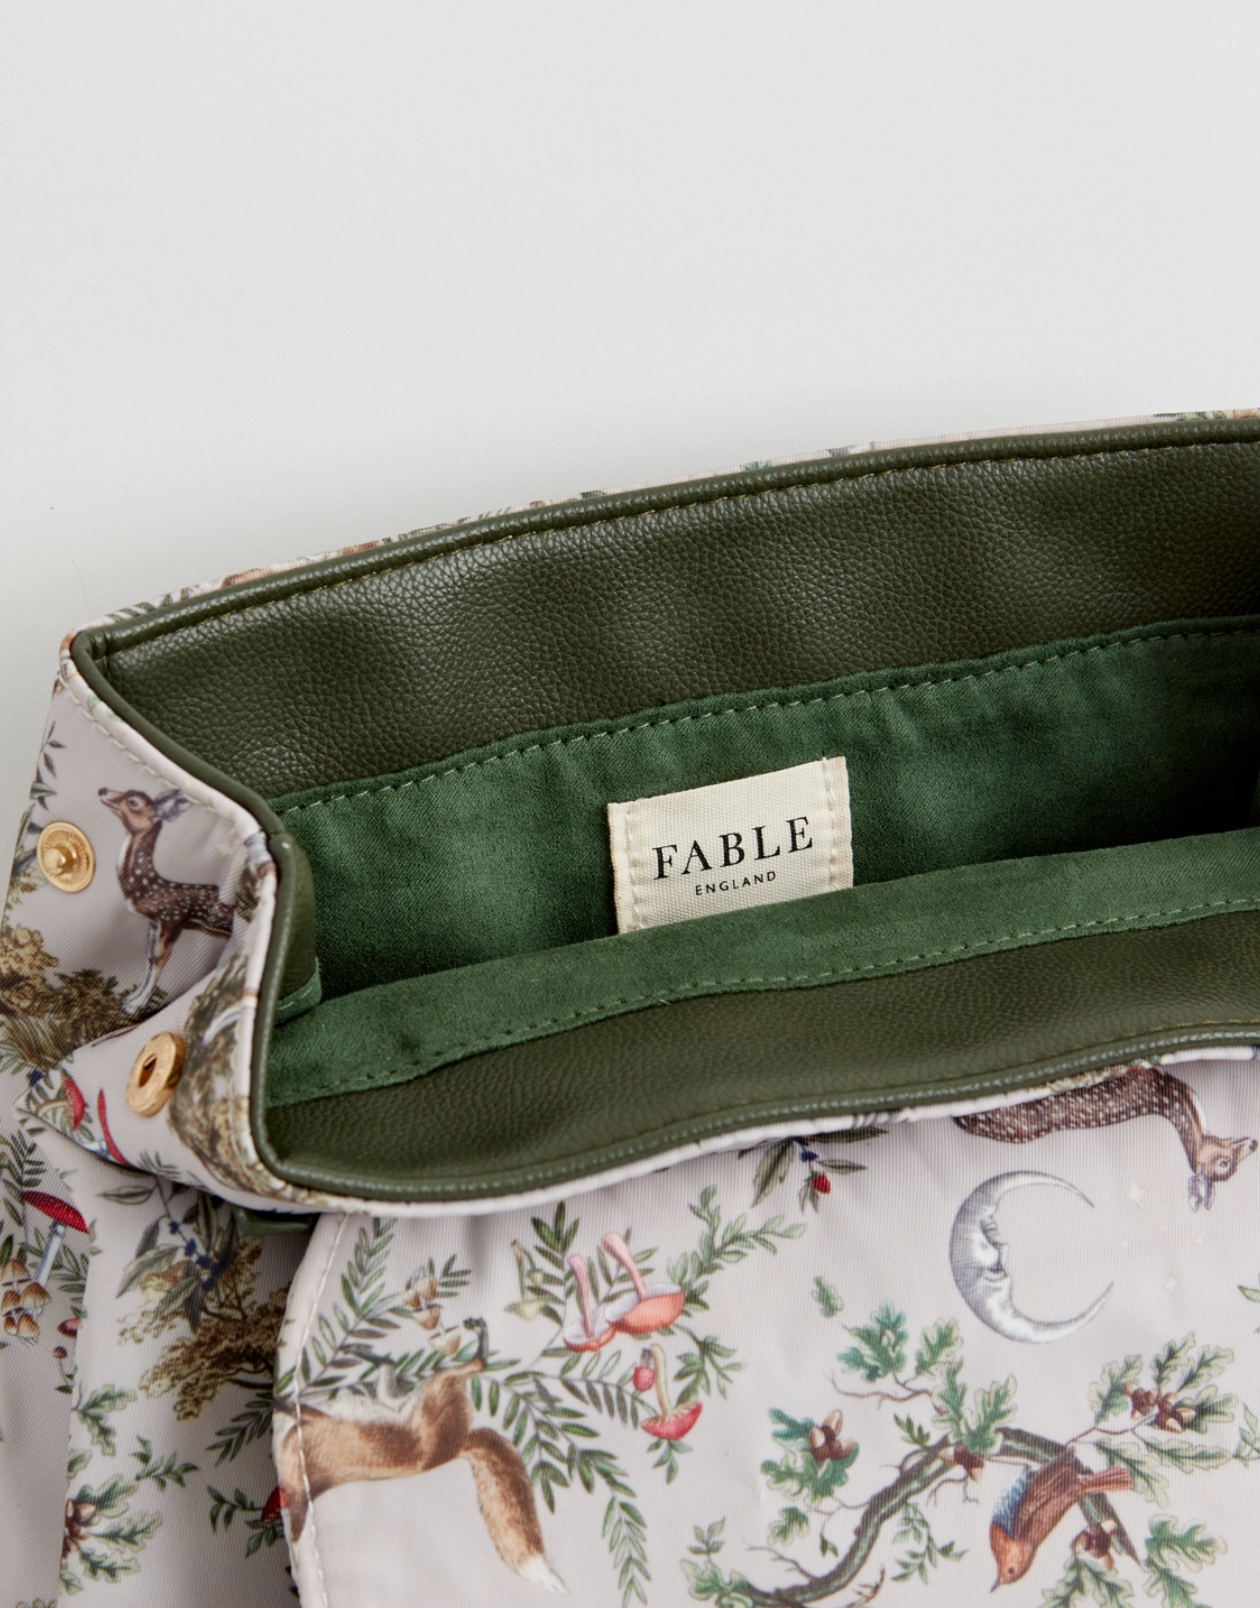 A Night's Tale Mini Backpack by Fable England